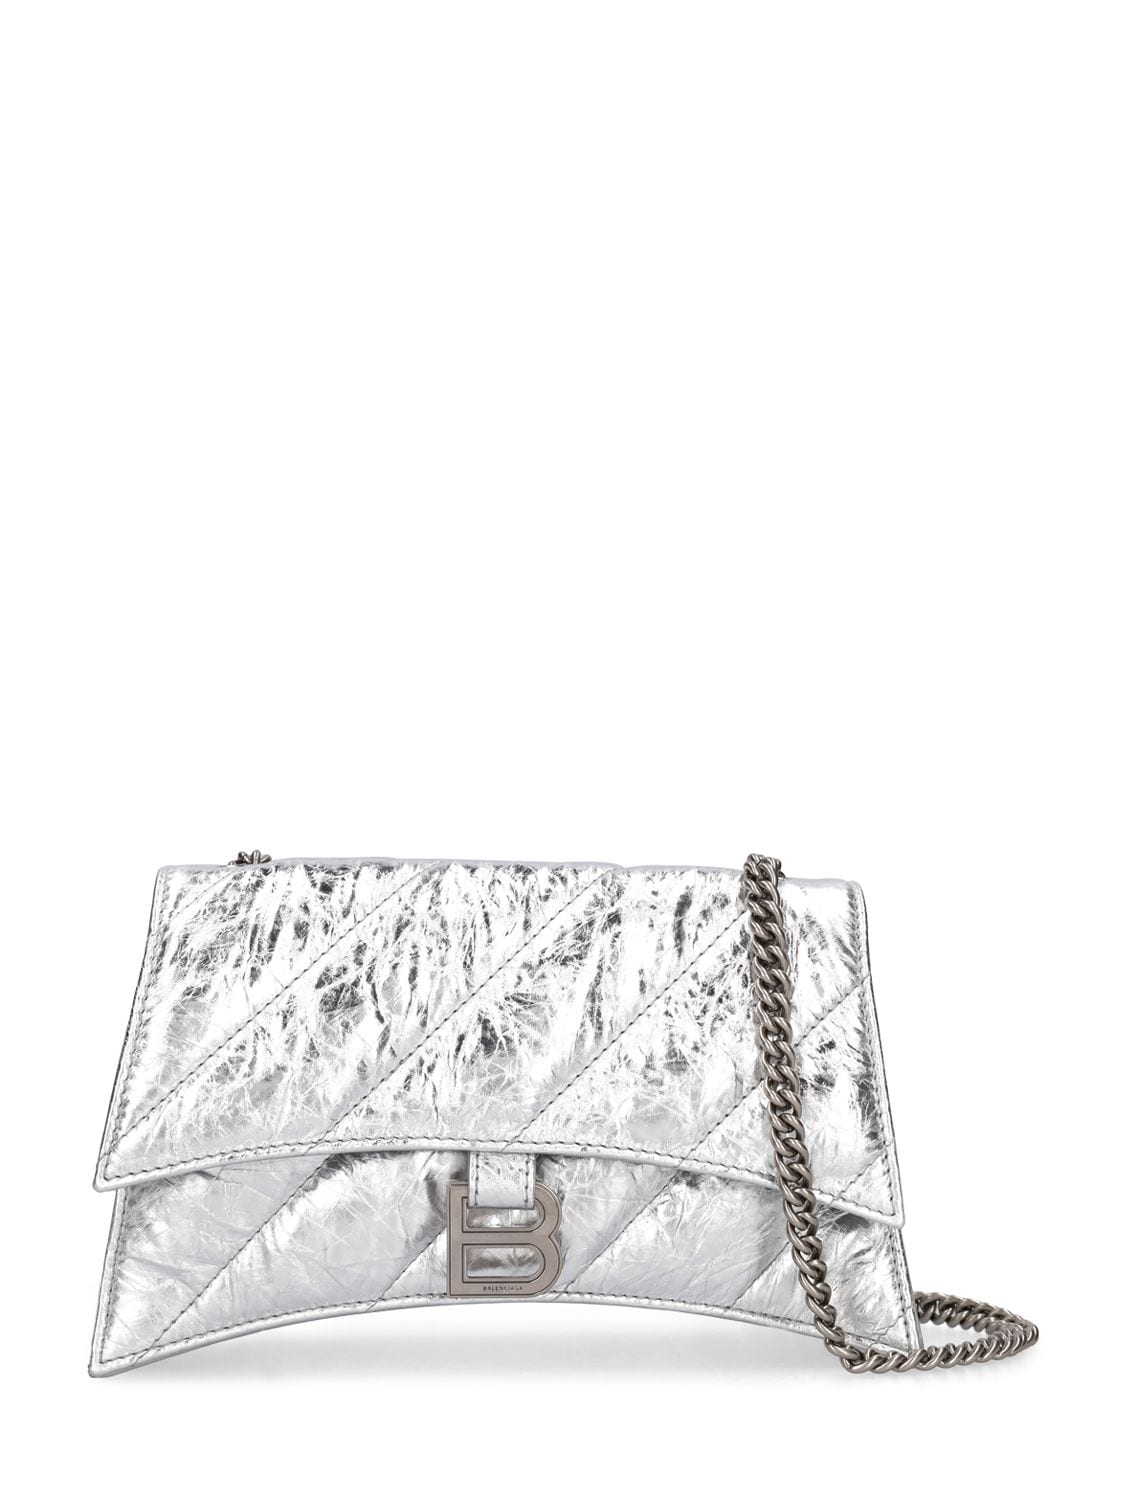 Balenciaga Crush Xs Quilted Leather Shoulder Bag In Silver